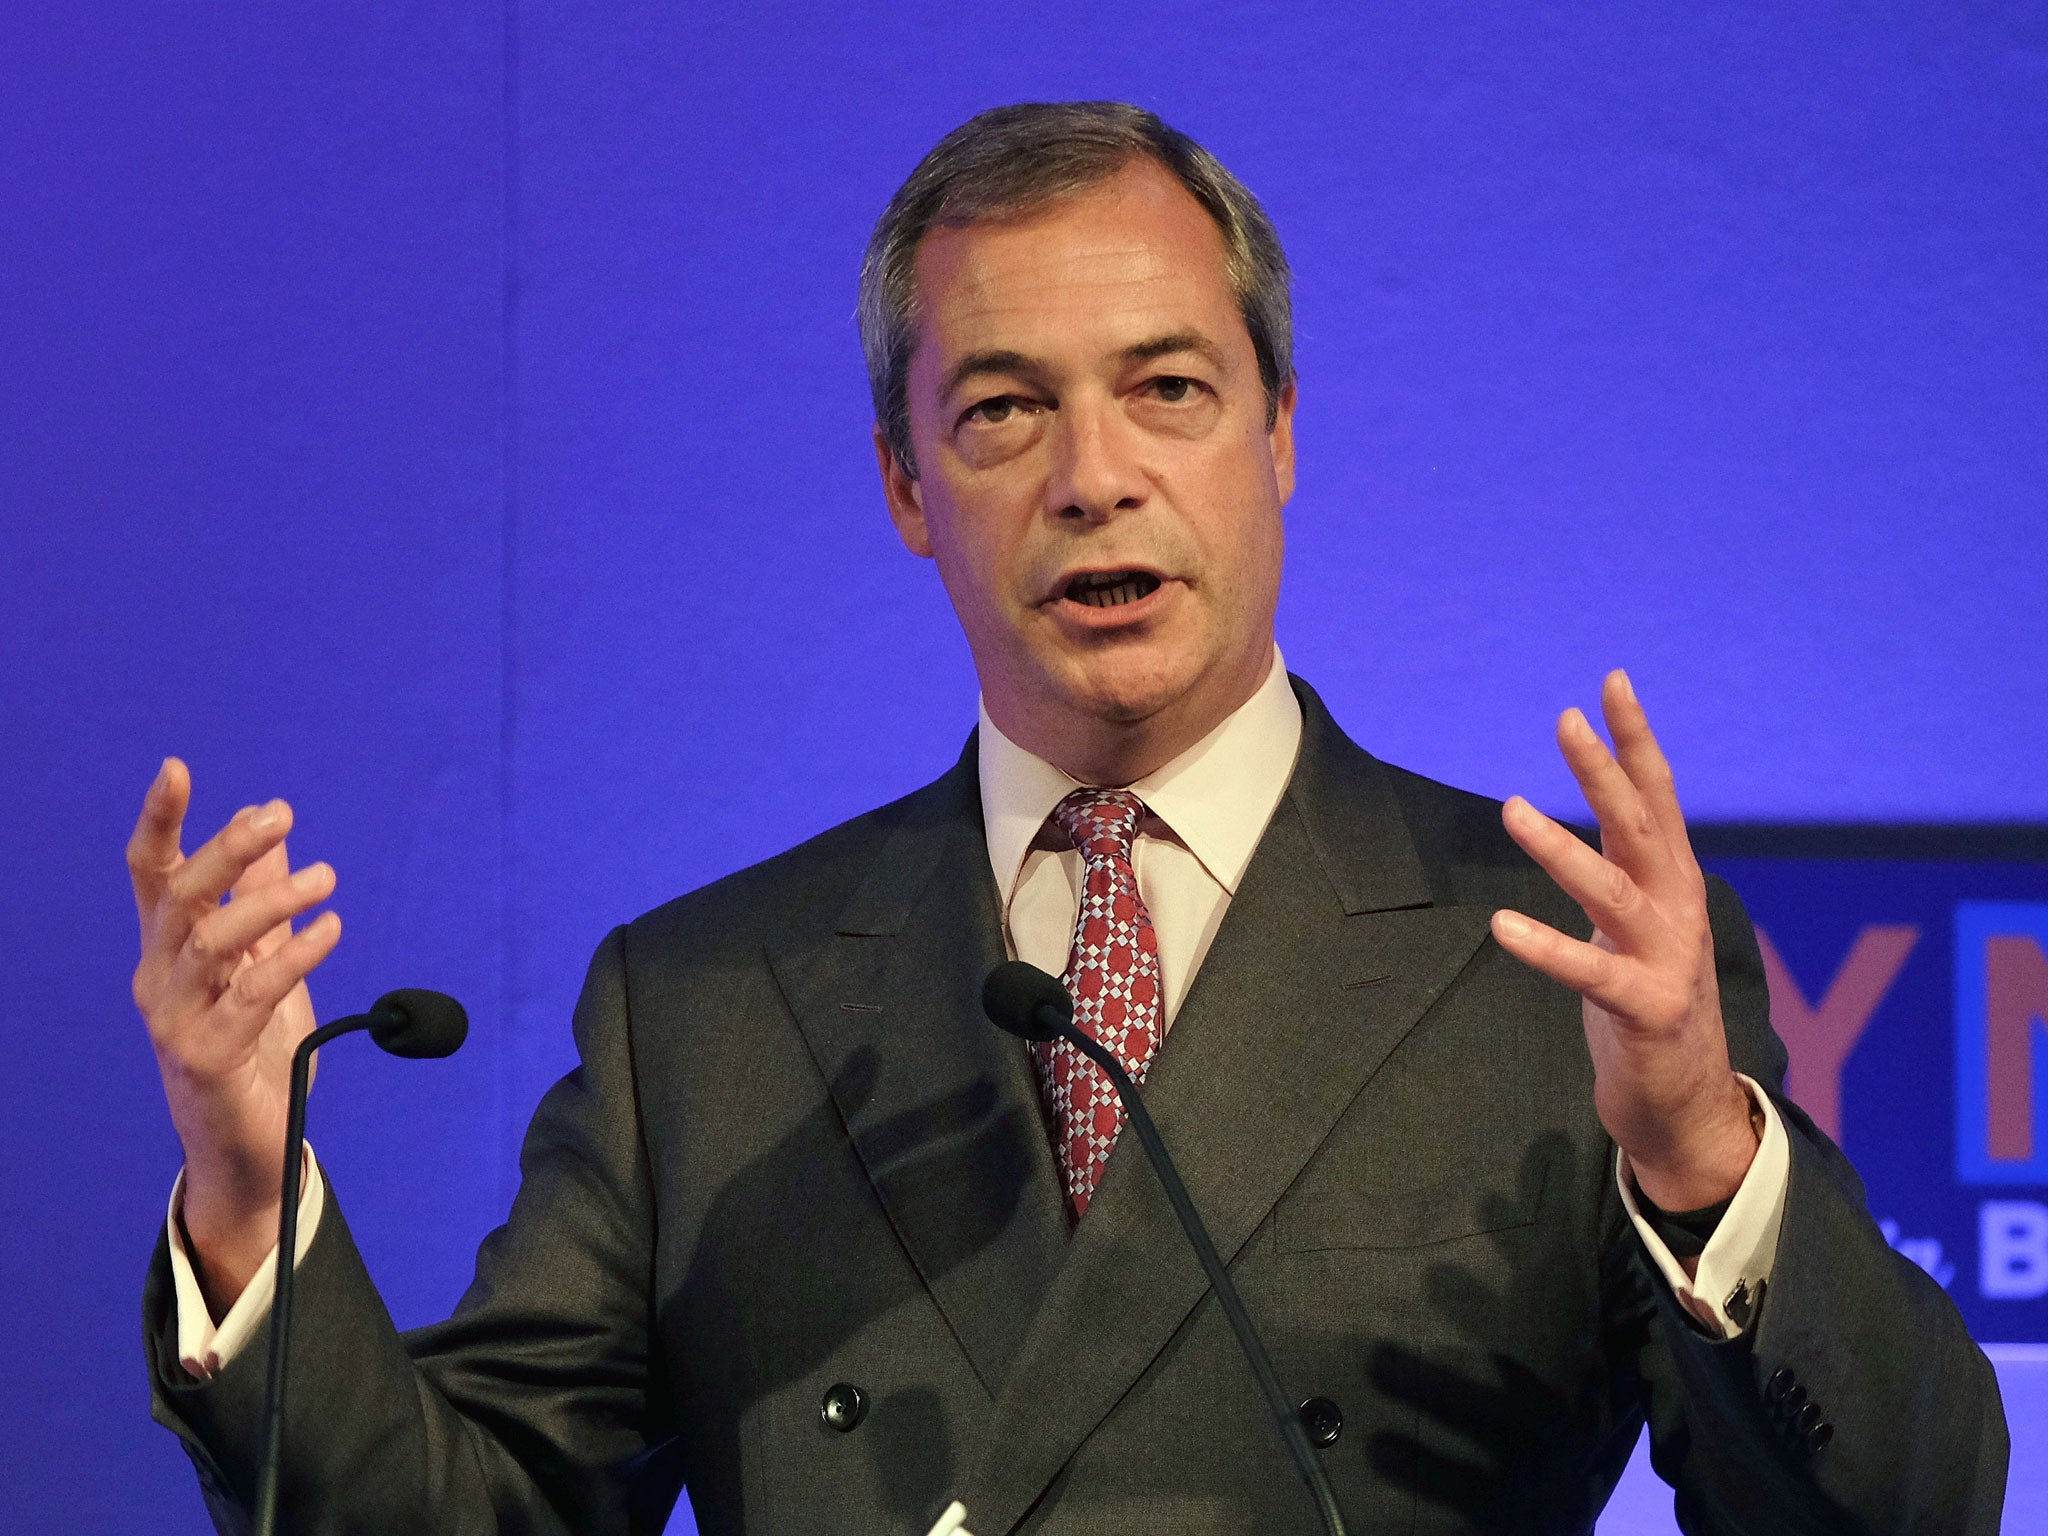 Nigel Farage said the European Union is now 'seriously imperilling our security' by allowing the free movement of refugees